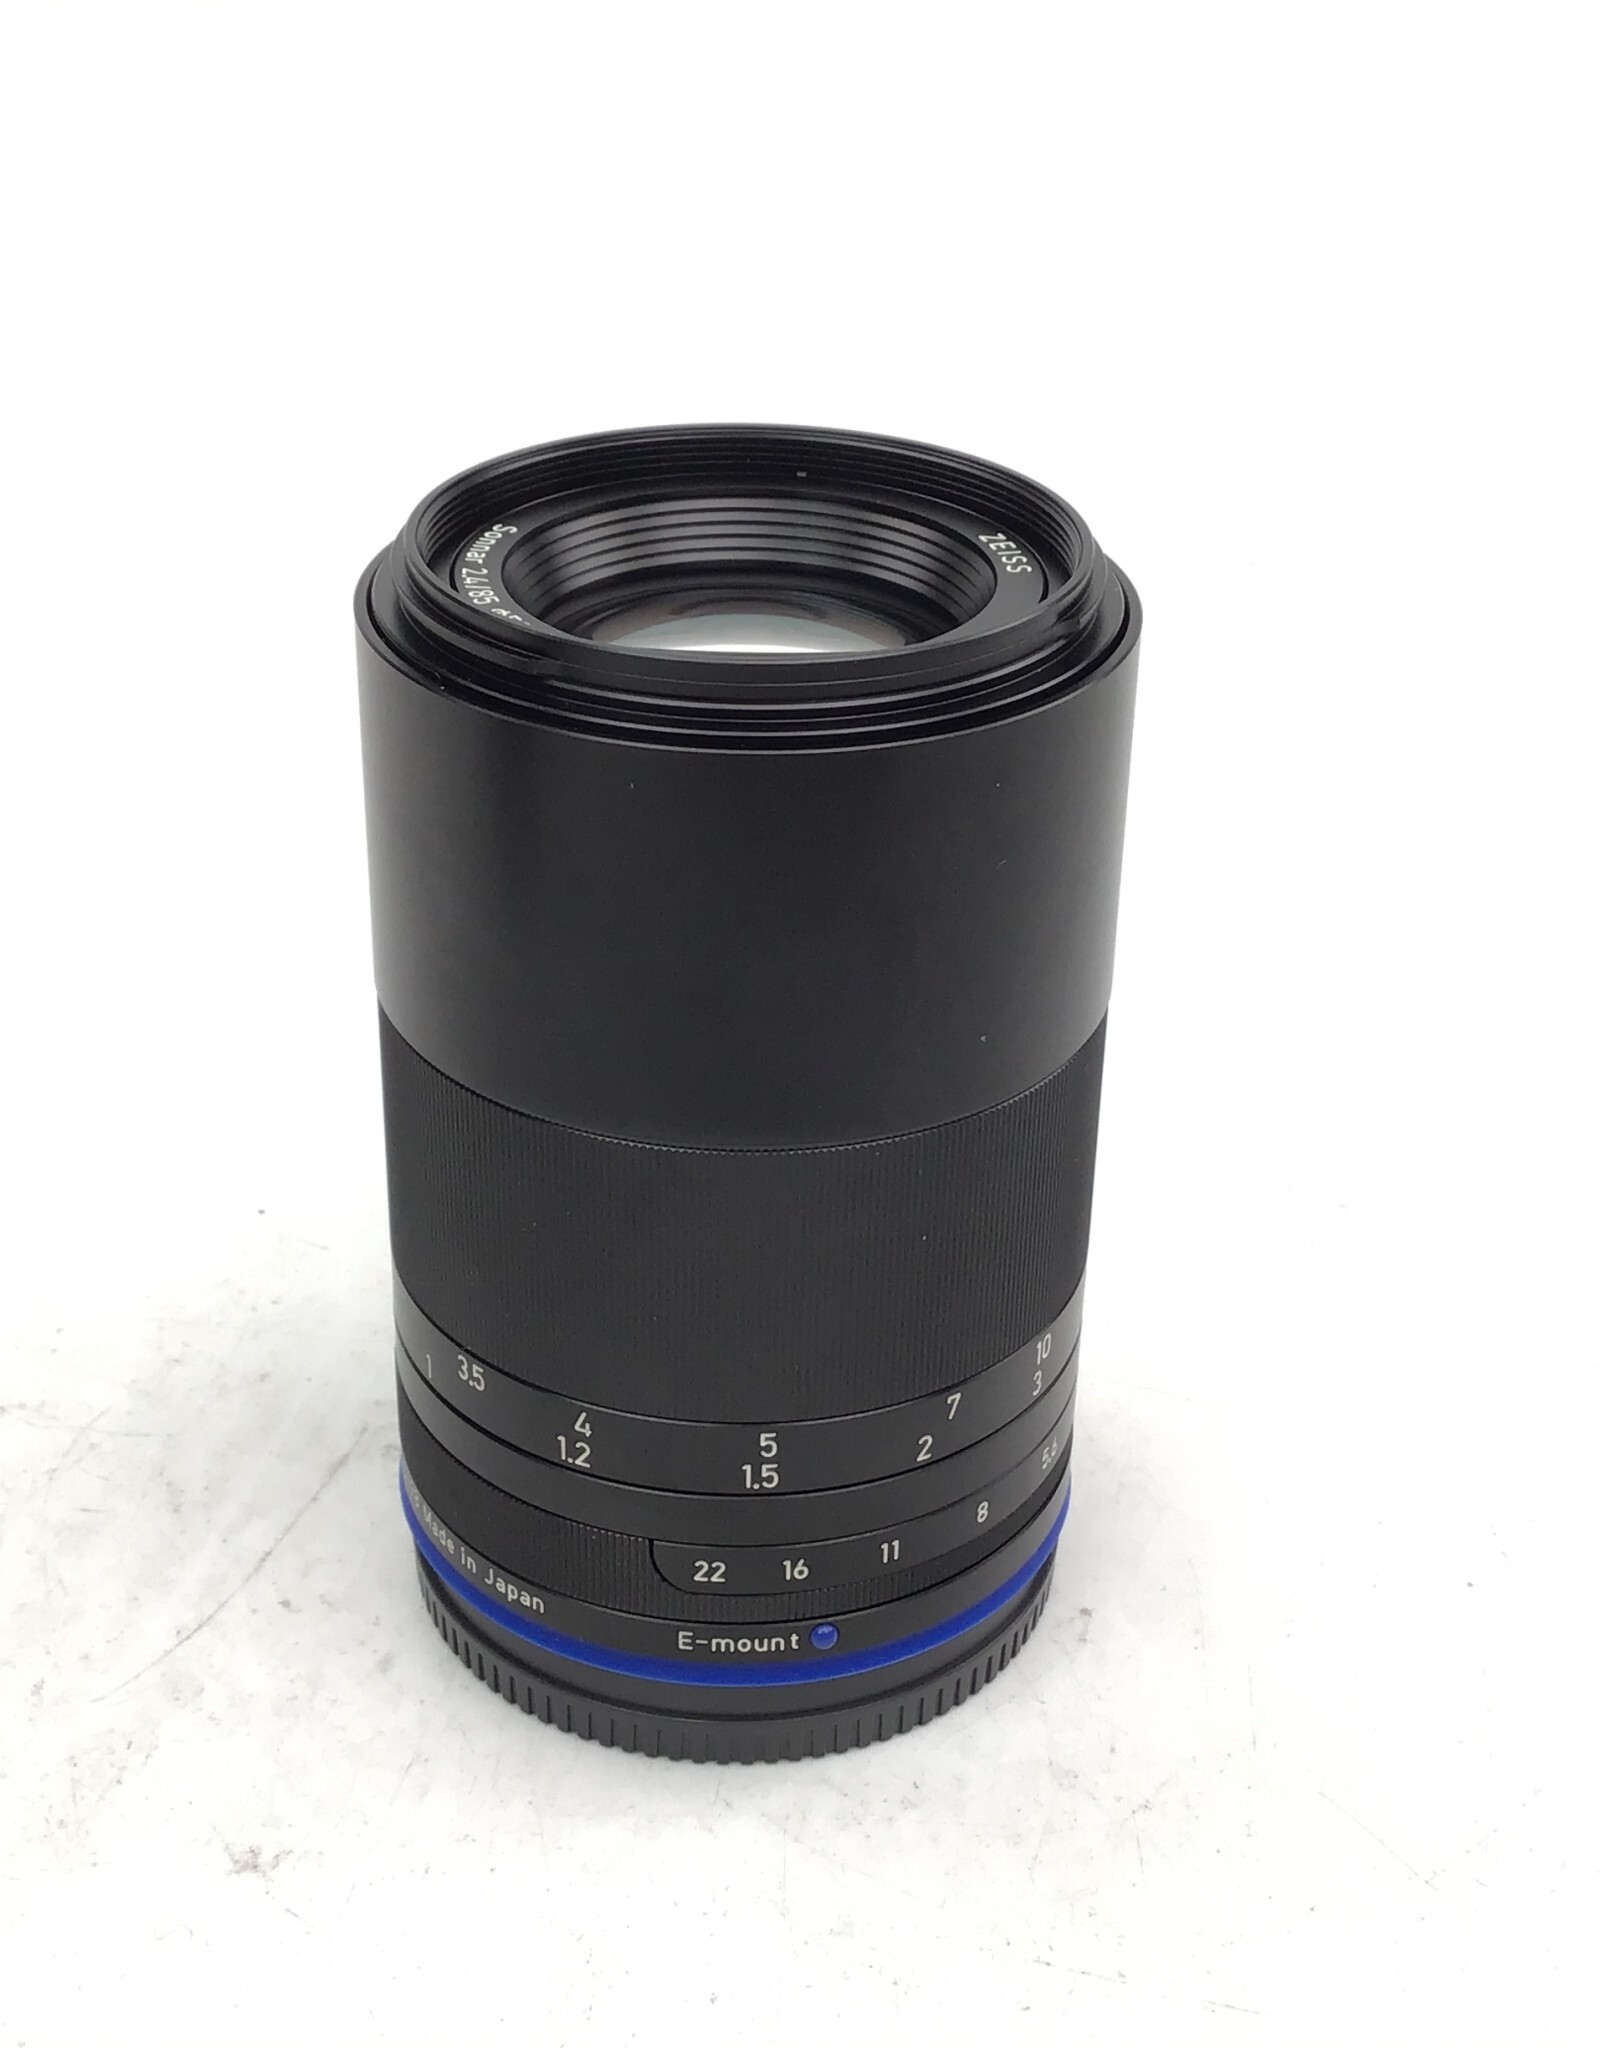 ZEISS Zeiss Sonnar Loxia 85mm f2.4 Lens For Sony E Used Good